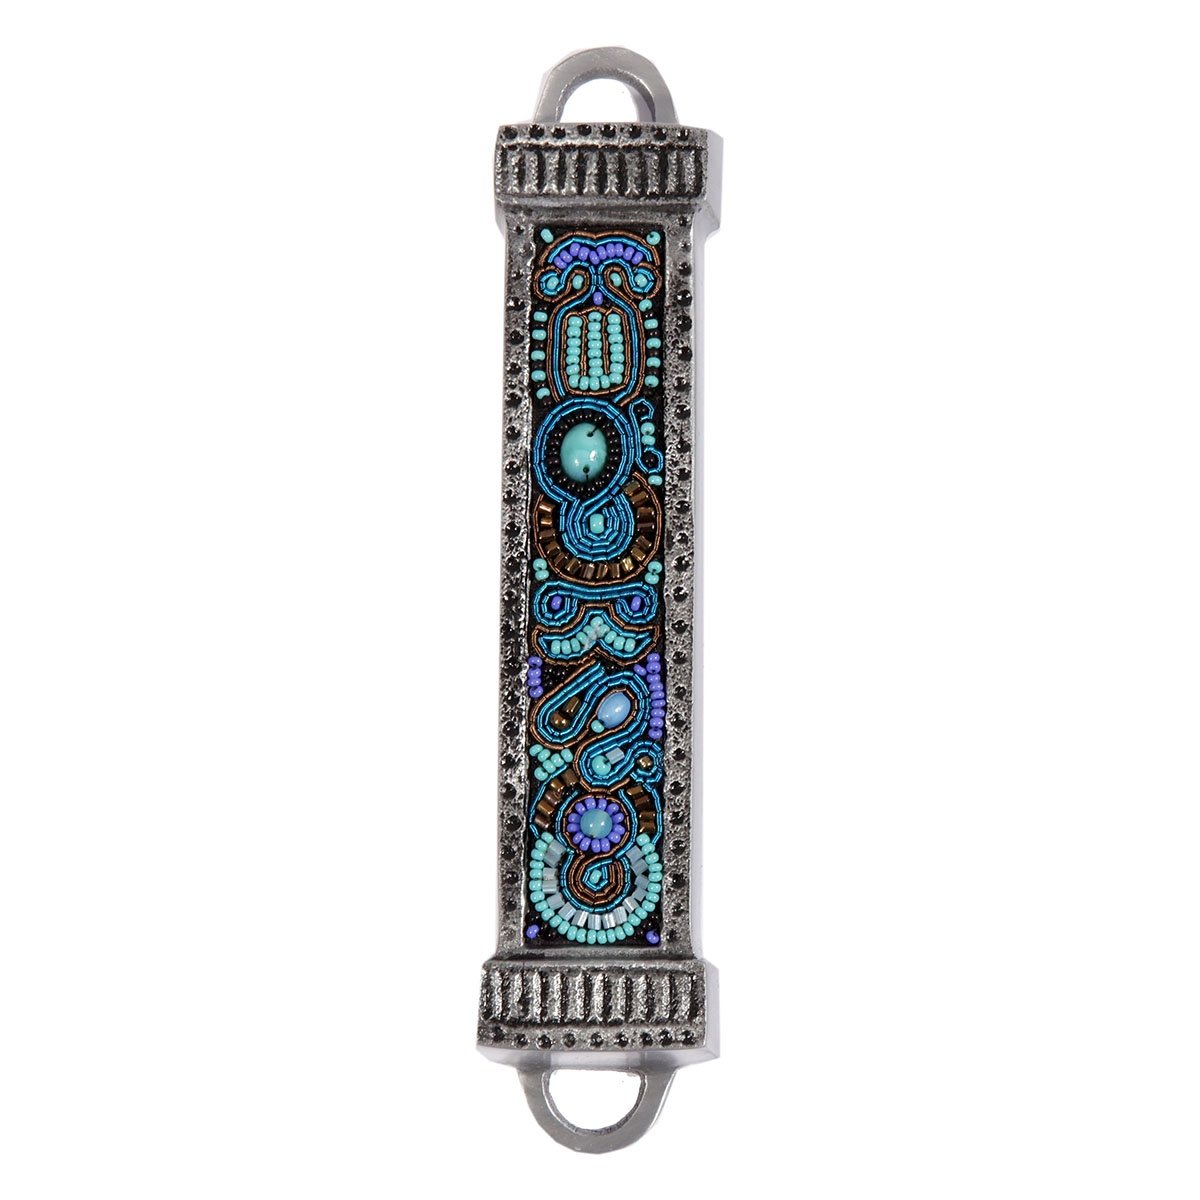 Yair Emanuel Aluminum Mezuzah with Embroidered Beads-Turquoise/Purple - 1